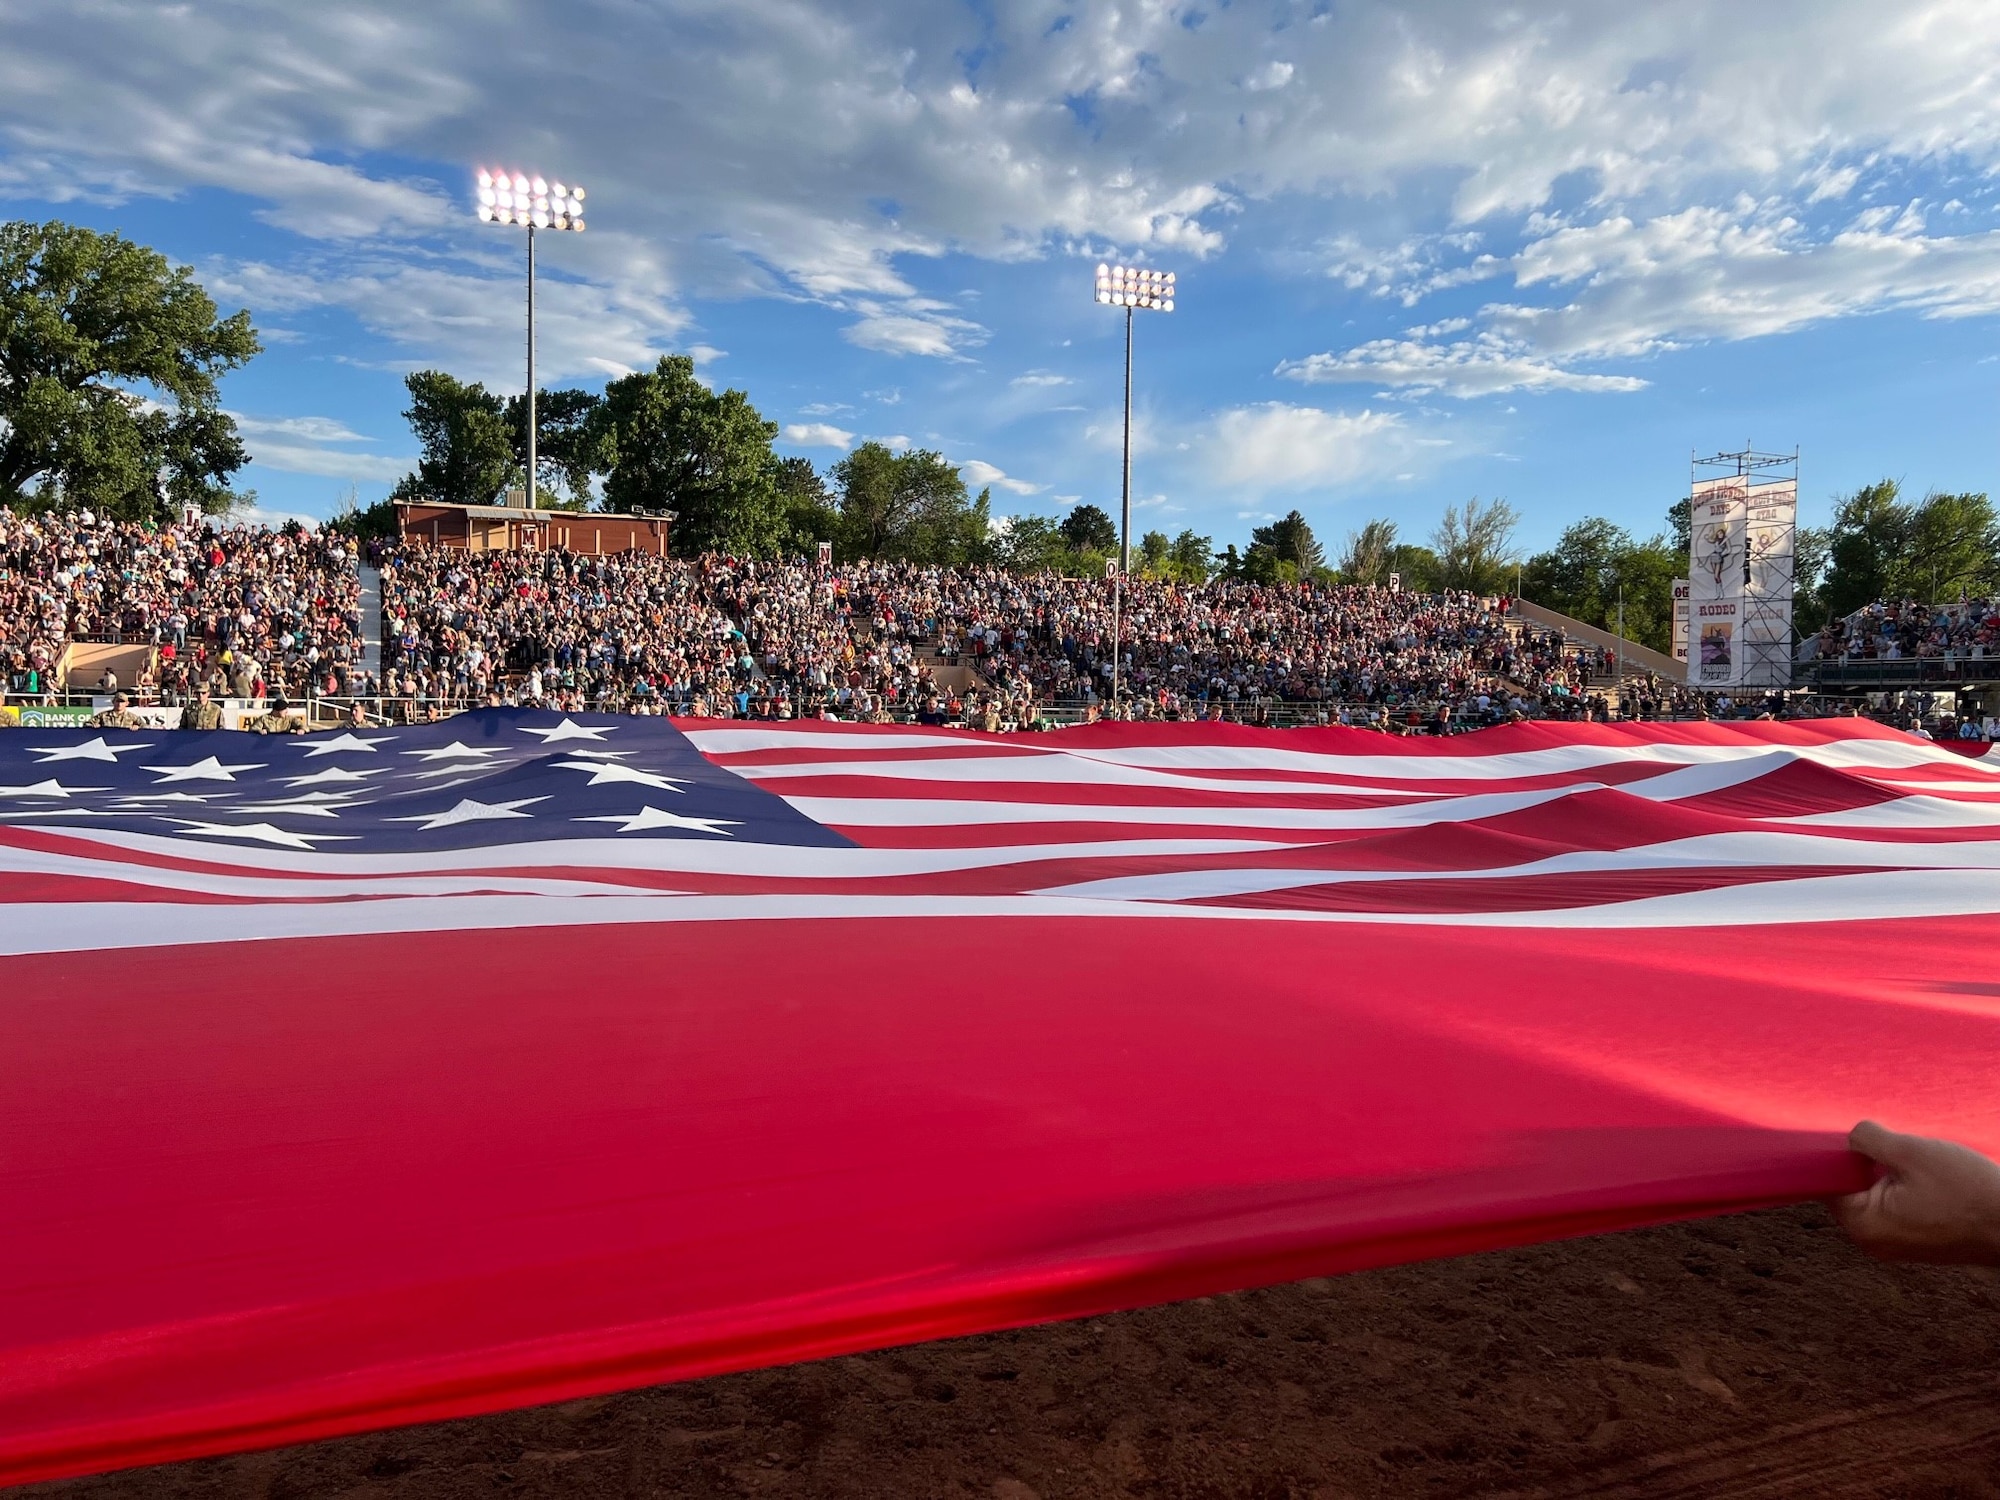 The Major, a giant American flag is unfurled by patriots from Hill AFB and other Utah service members celebrating Patriot Night at the Ogden Pioneer Days Rodeo opening ceremony July 22, 2022, in Ogden, Utah.